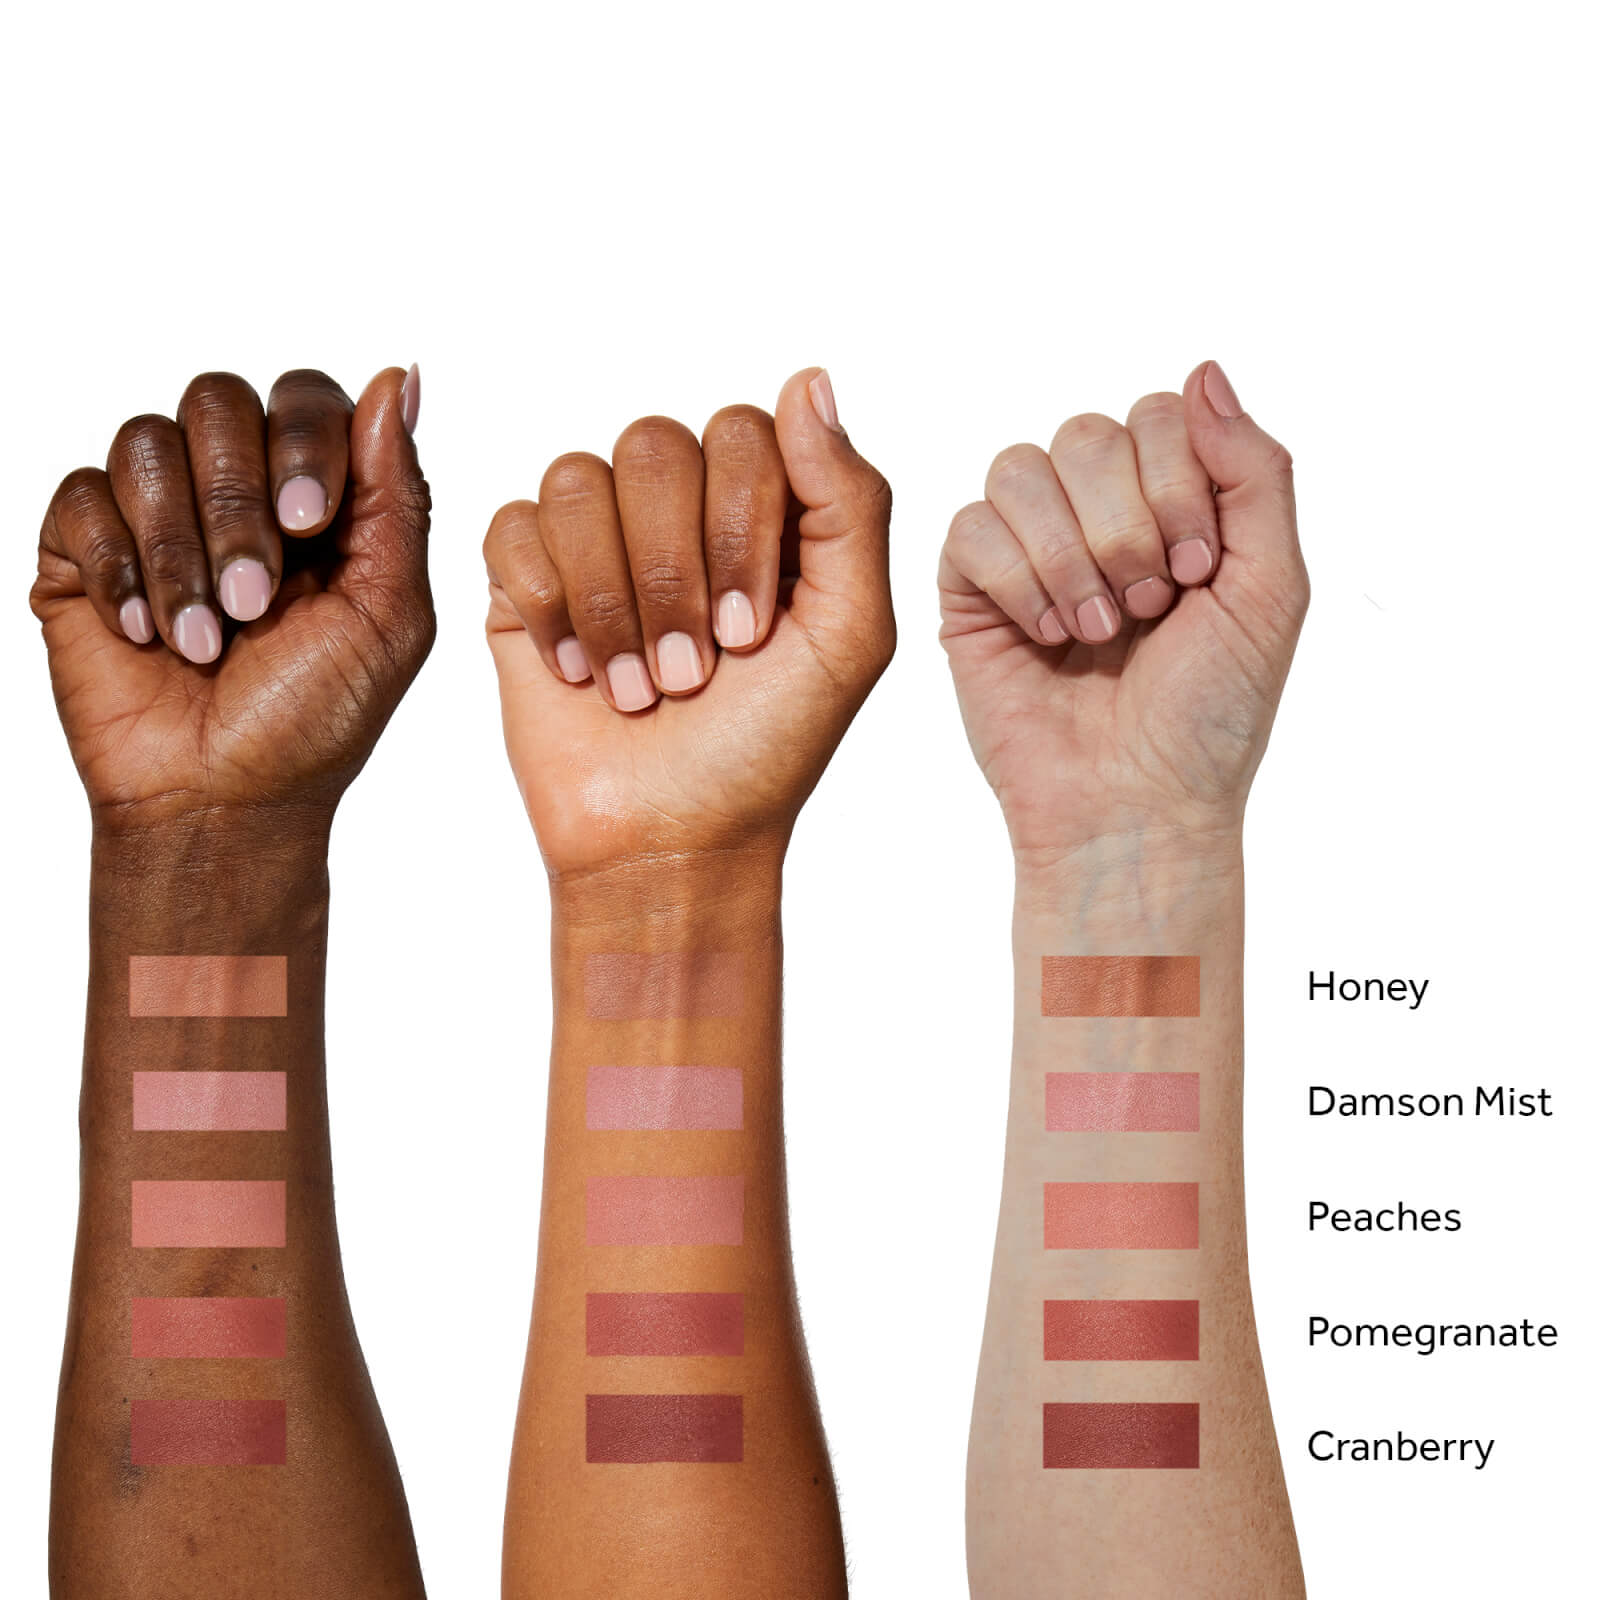 The image shows how the shades look on different skin types and the numbers show the shades